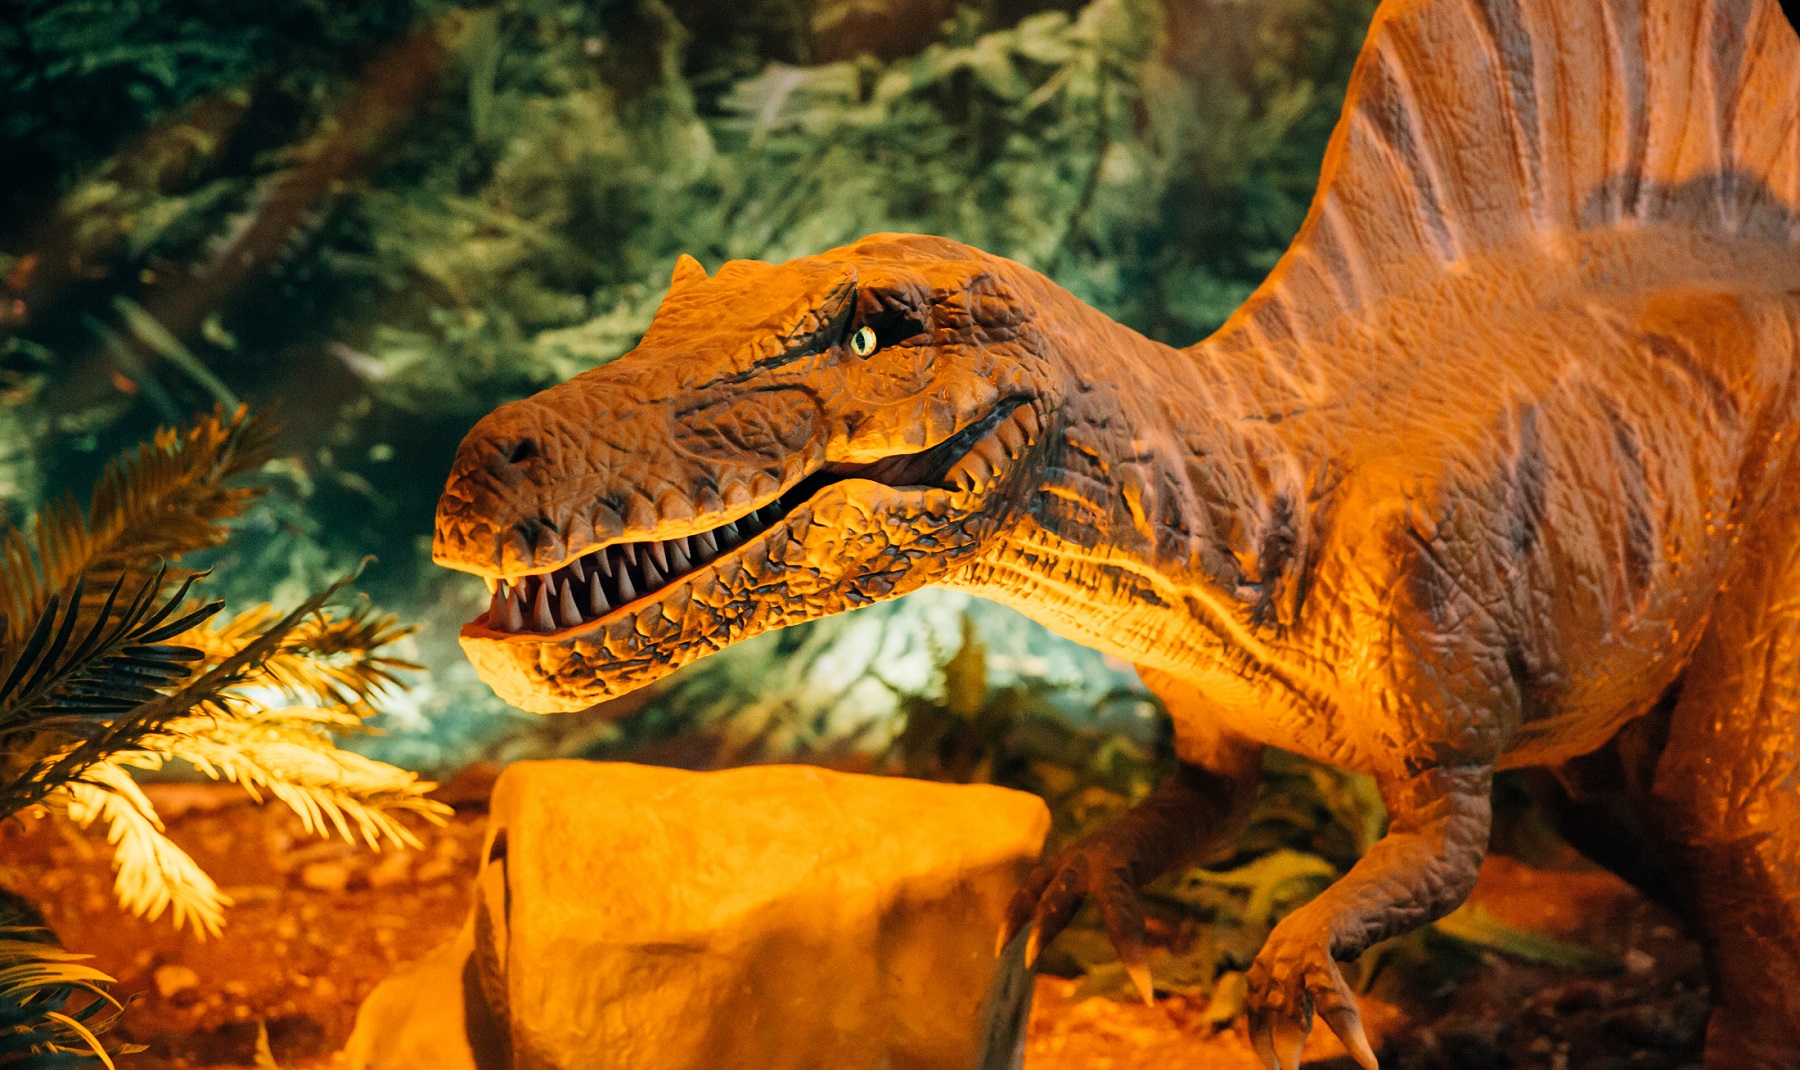 ExCeL London will Host an Immersive Jurassic World Experience